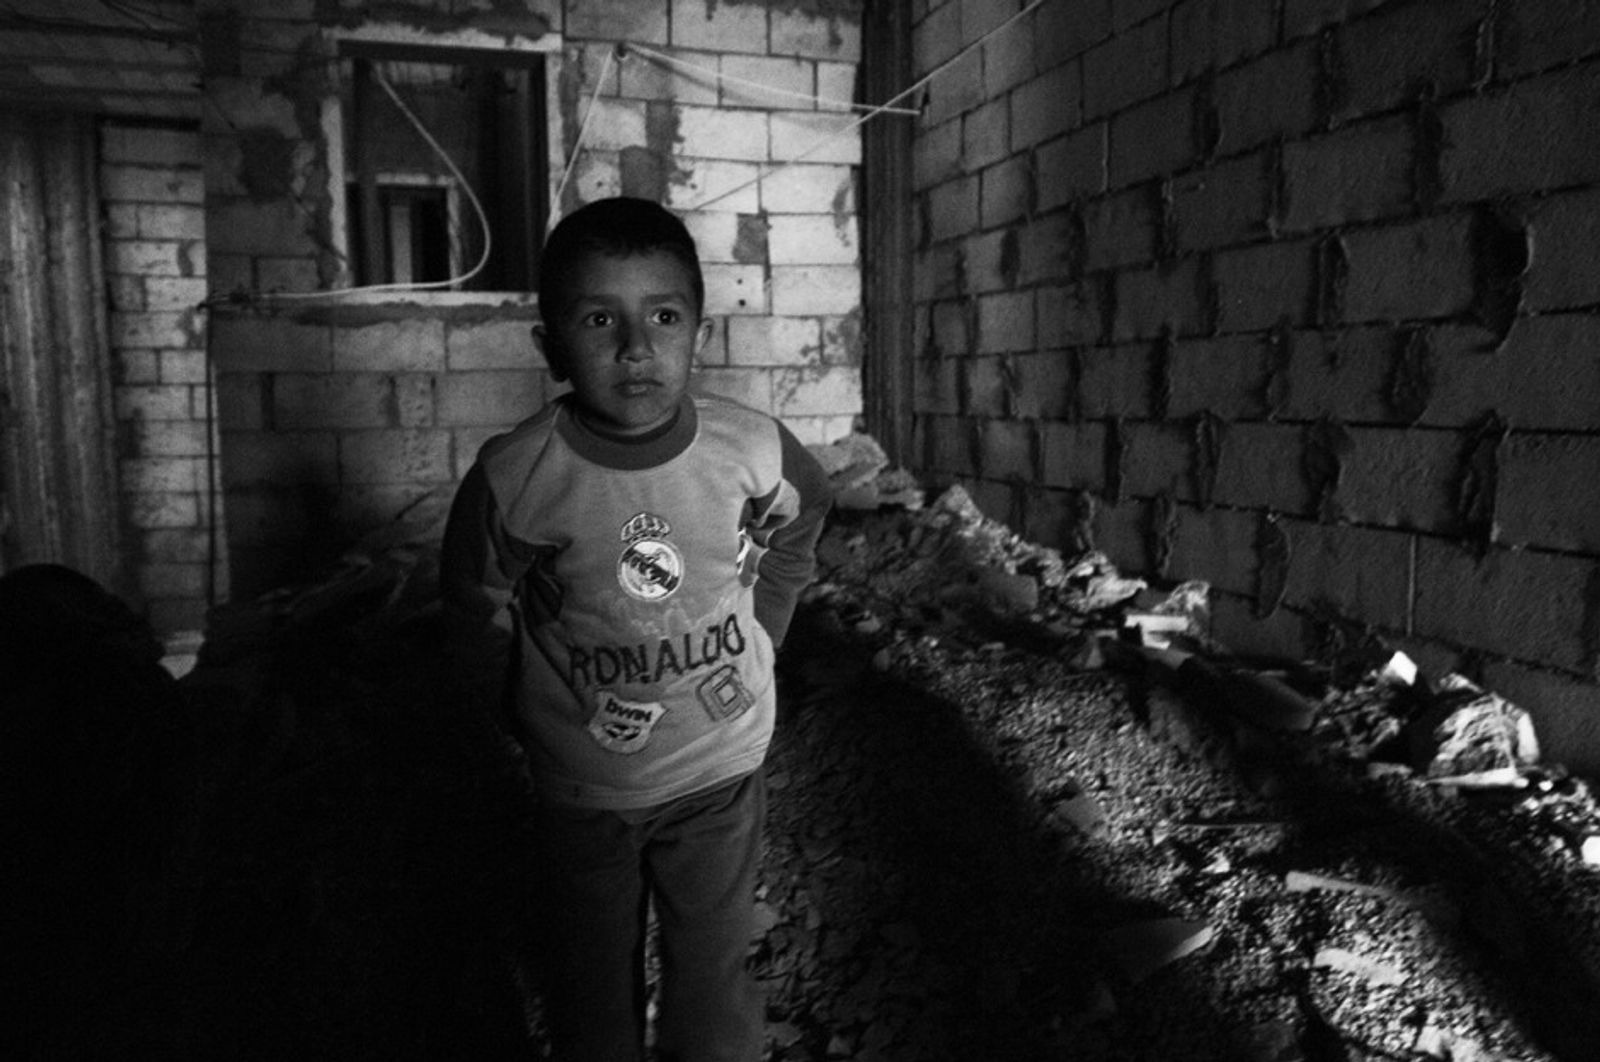 © Stephen Boyle - Image from the Welcome To Lebanon photography project